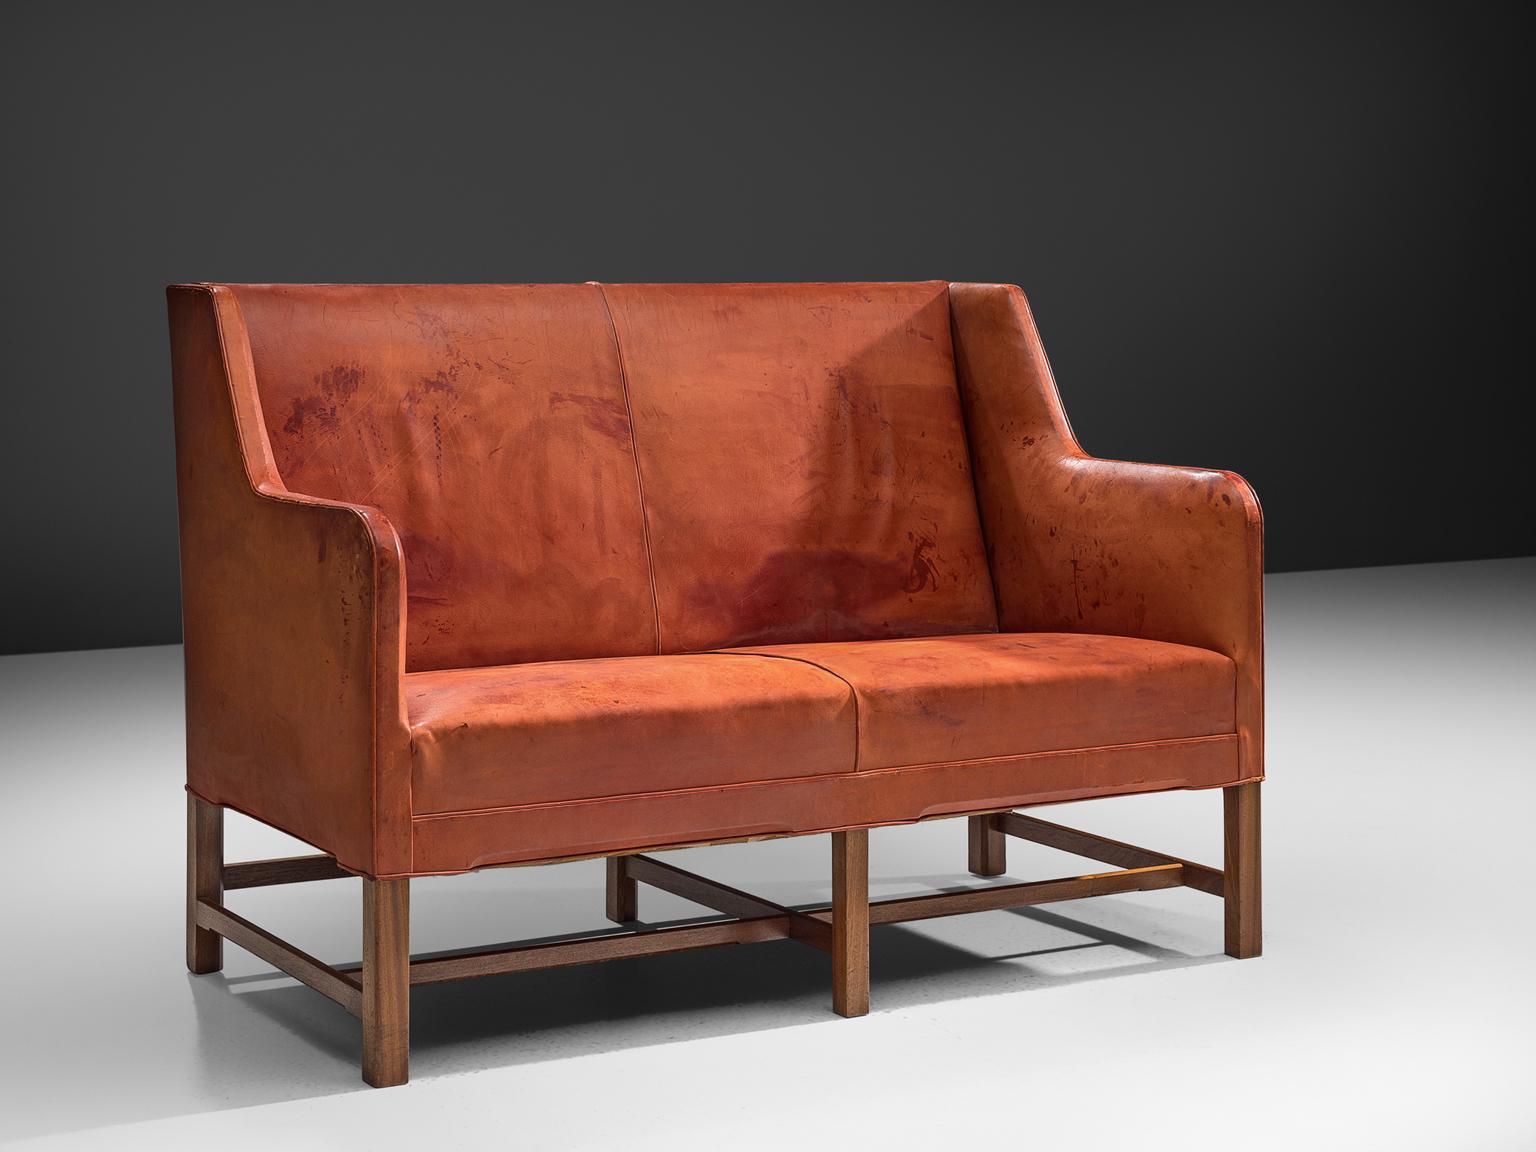 Kaare Klint for Rud Rasmussen two-seat settee, in red cognac leather and teak legs, Denmark, 1930s.

Classic and elegant Scandinavian custom-made two-seat settee by Kaare Klint for manufacturer Rud Rasmussen. The piece is upholstered with